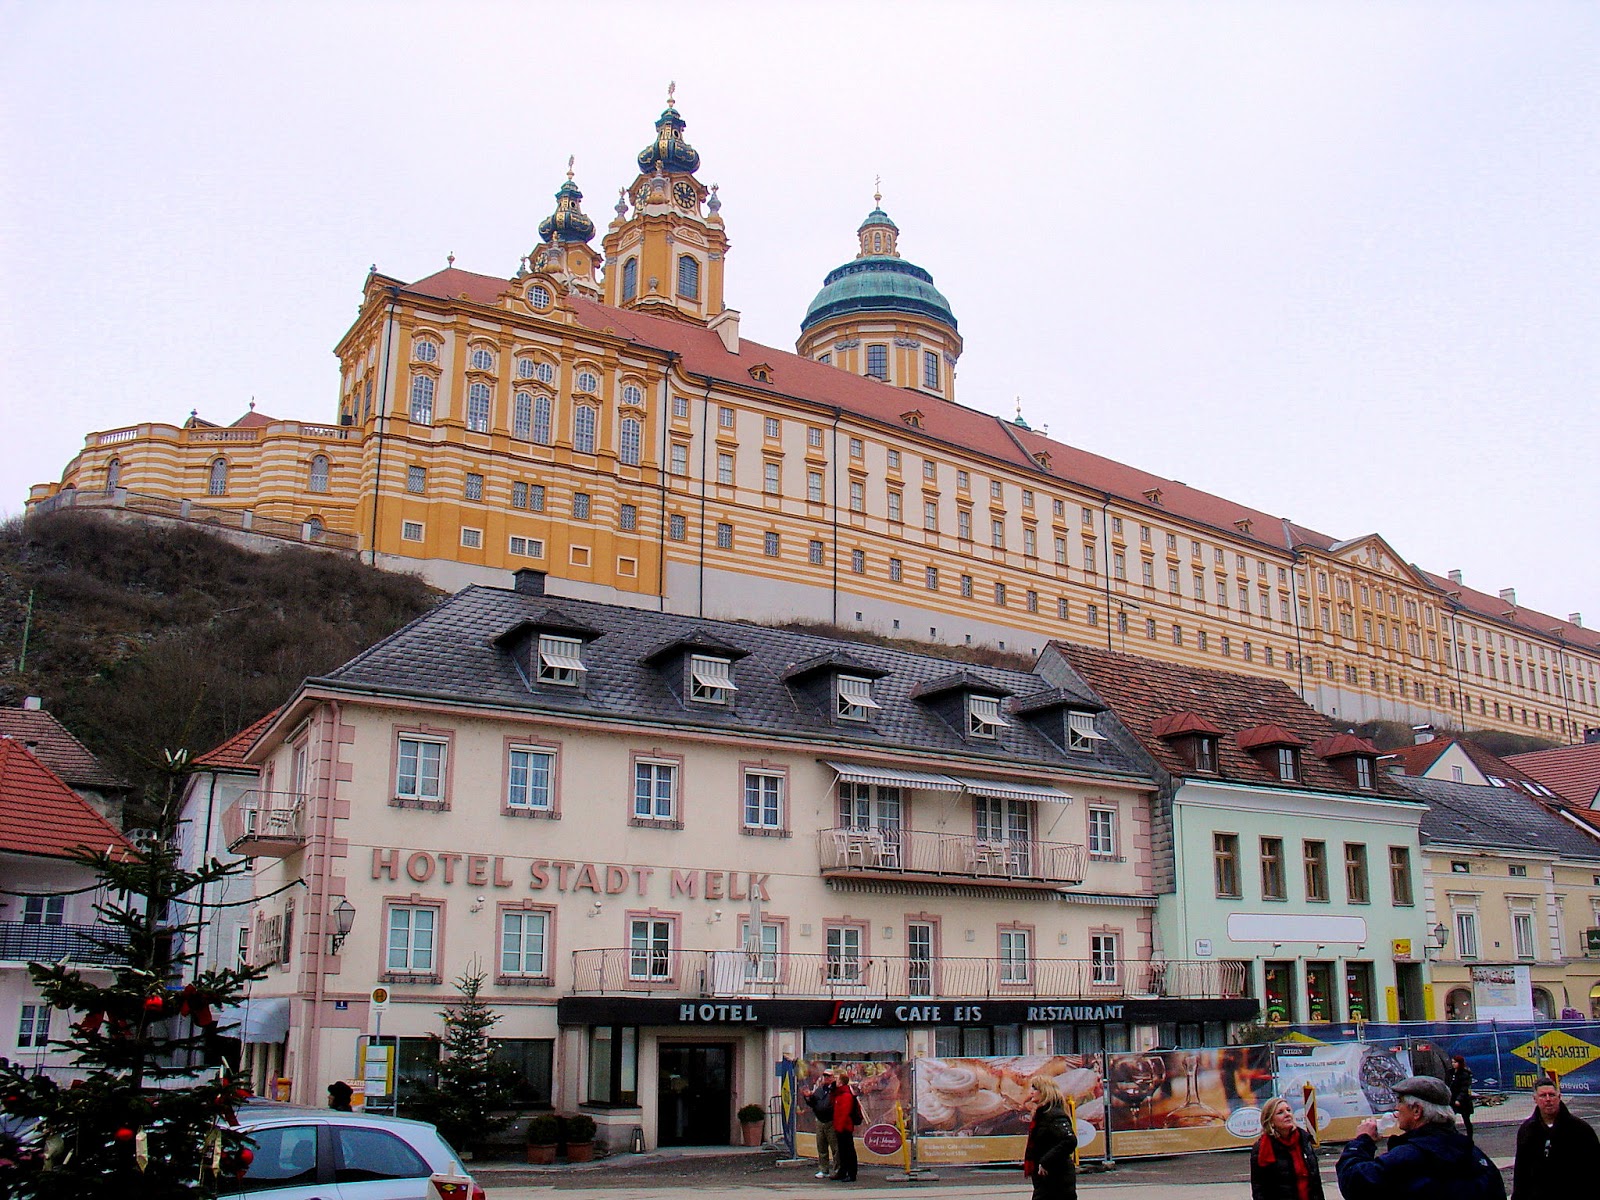 The imposing Melk Abbey looms over the tiny village of Melk below.